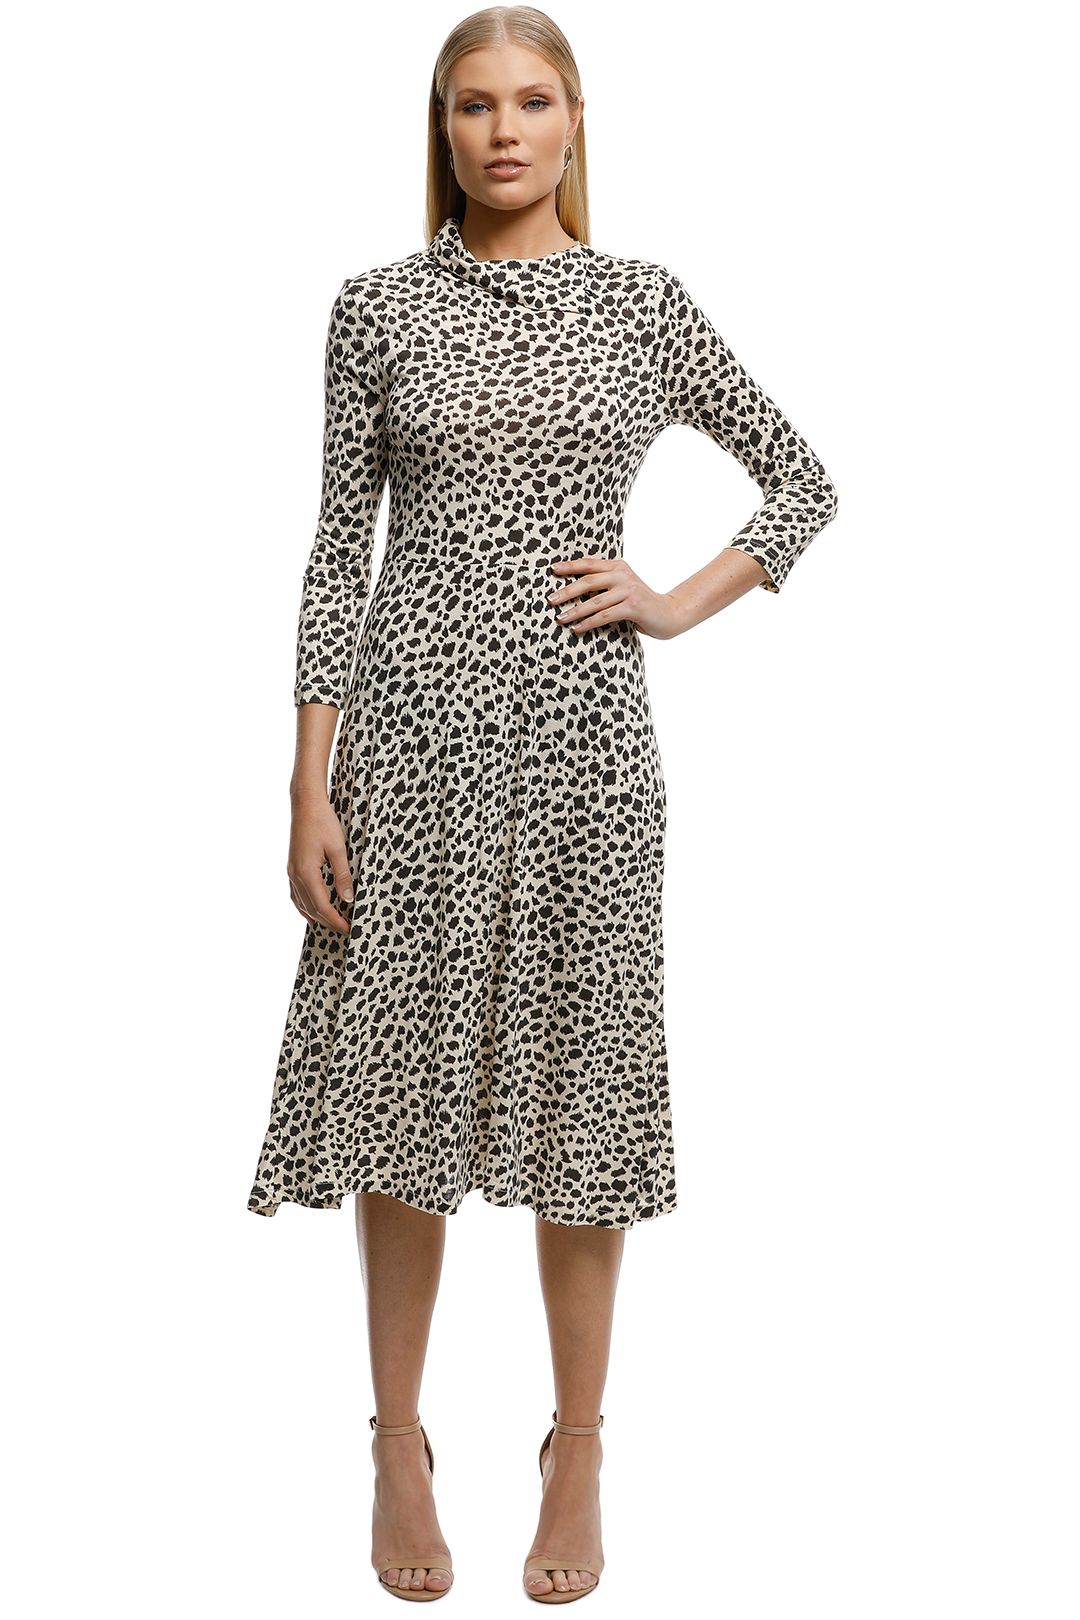 MNG - Animal Print Dress - Brown - Leopard - Front